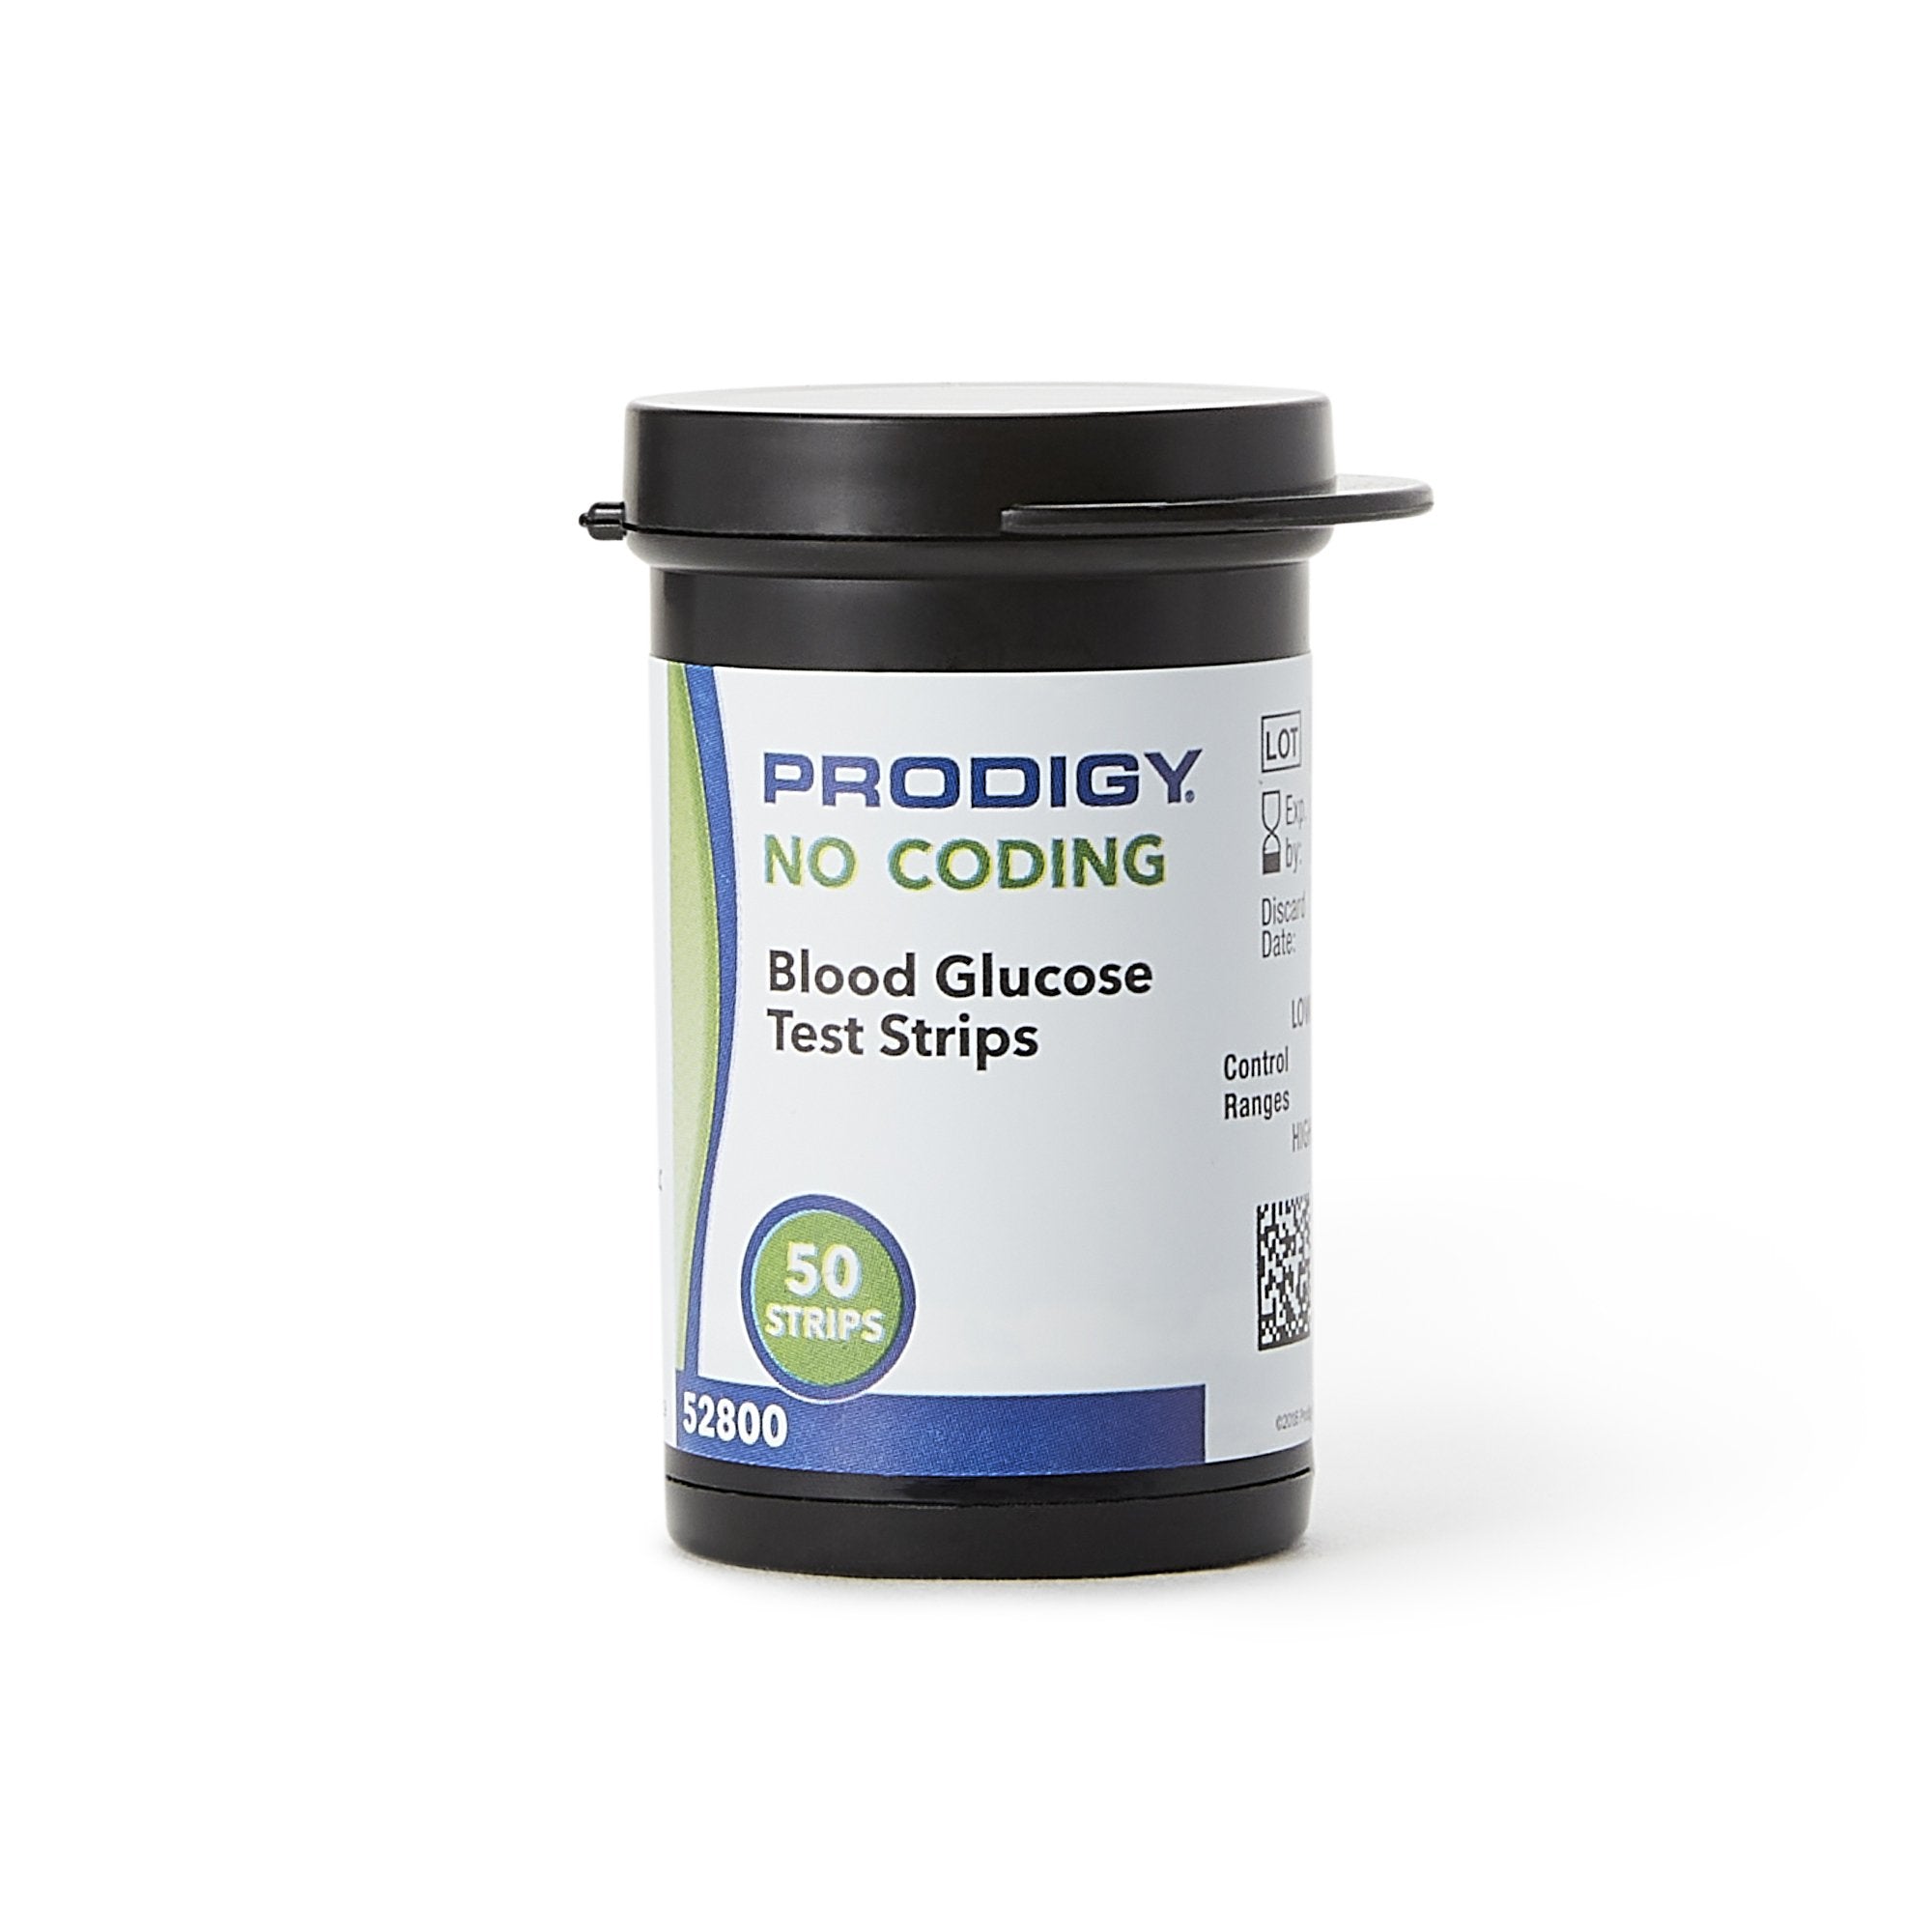 Blood Glucose Test Strips Prodigy 50 Strips per Pack